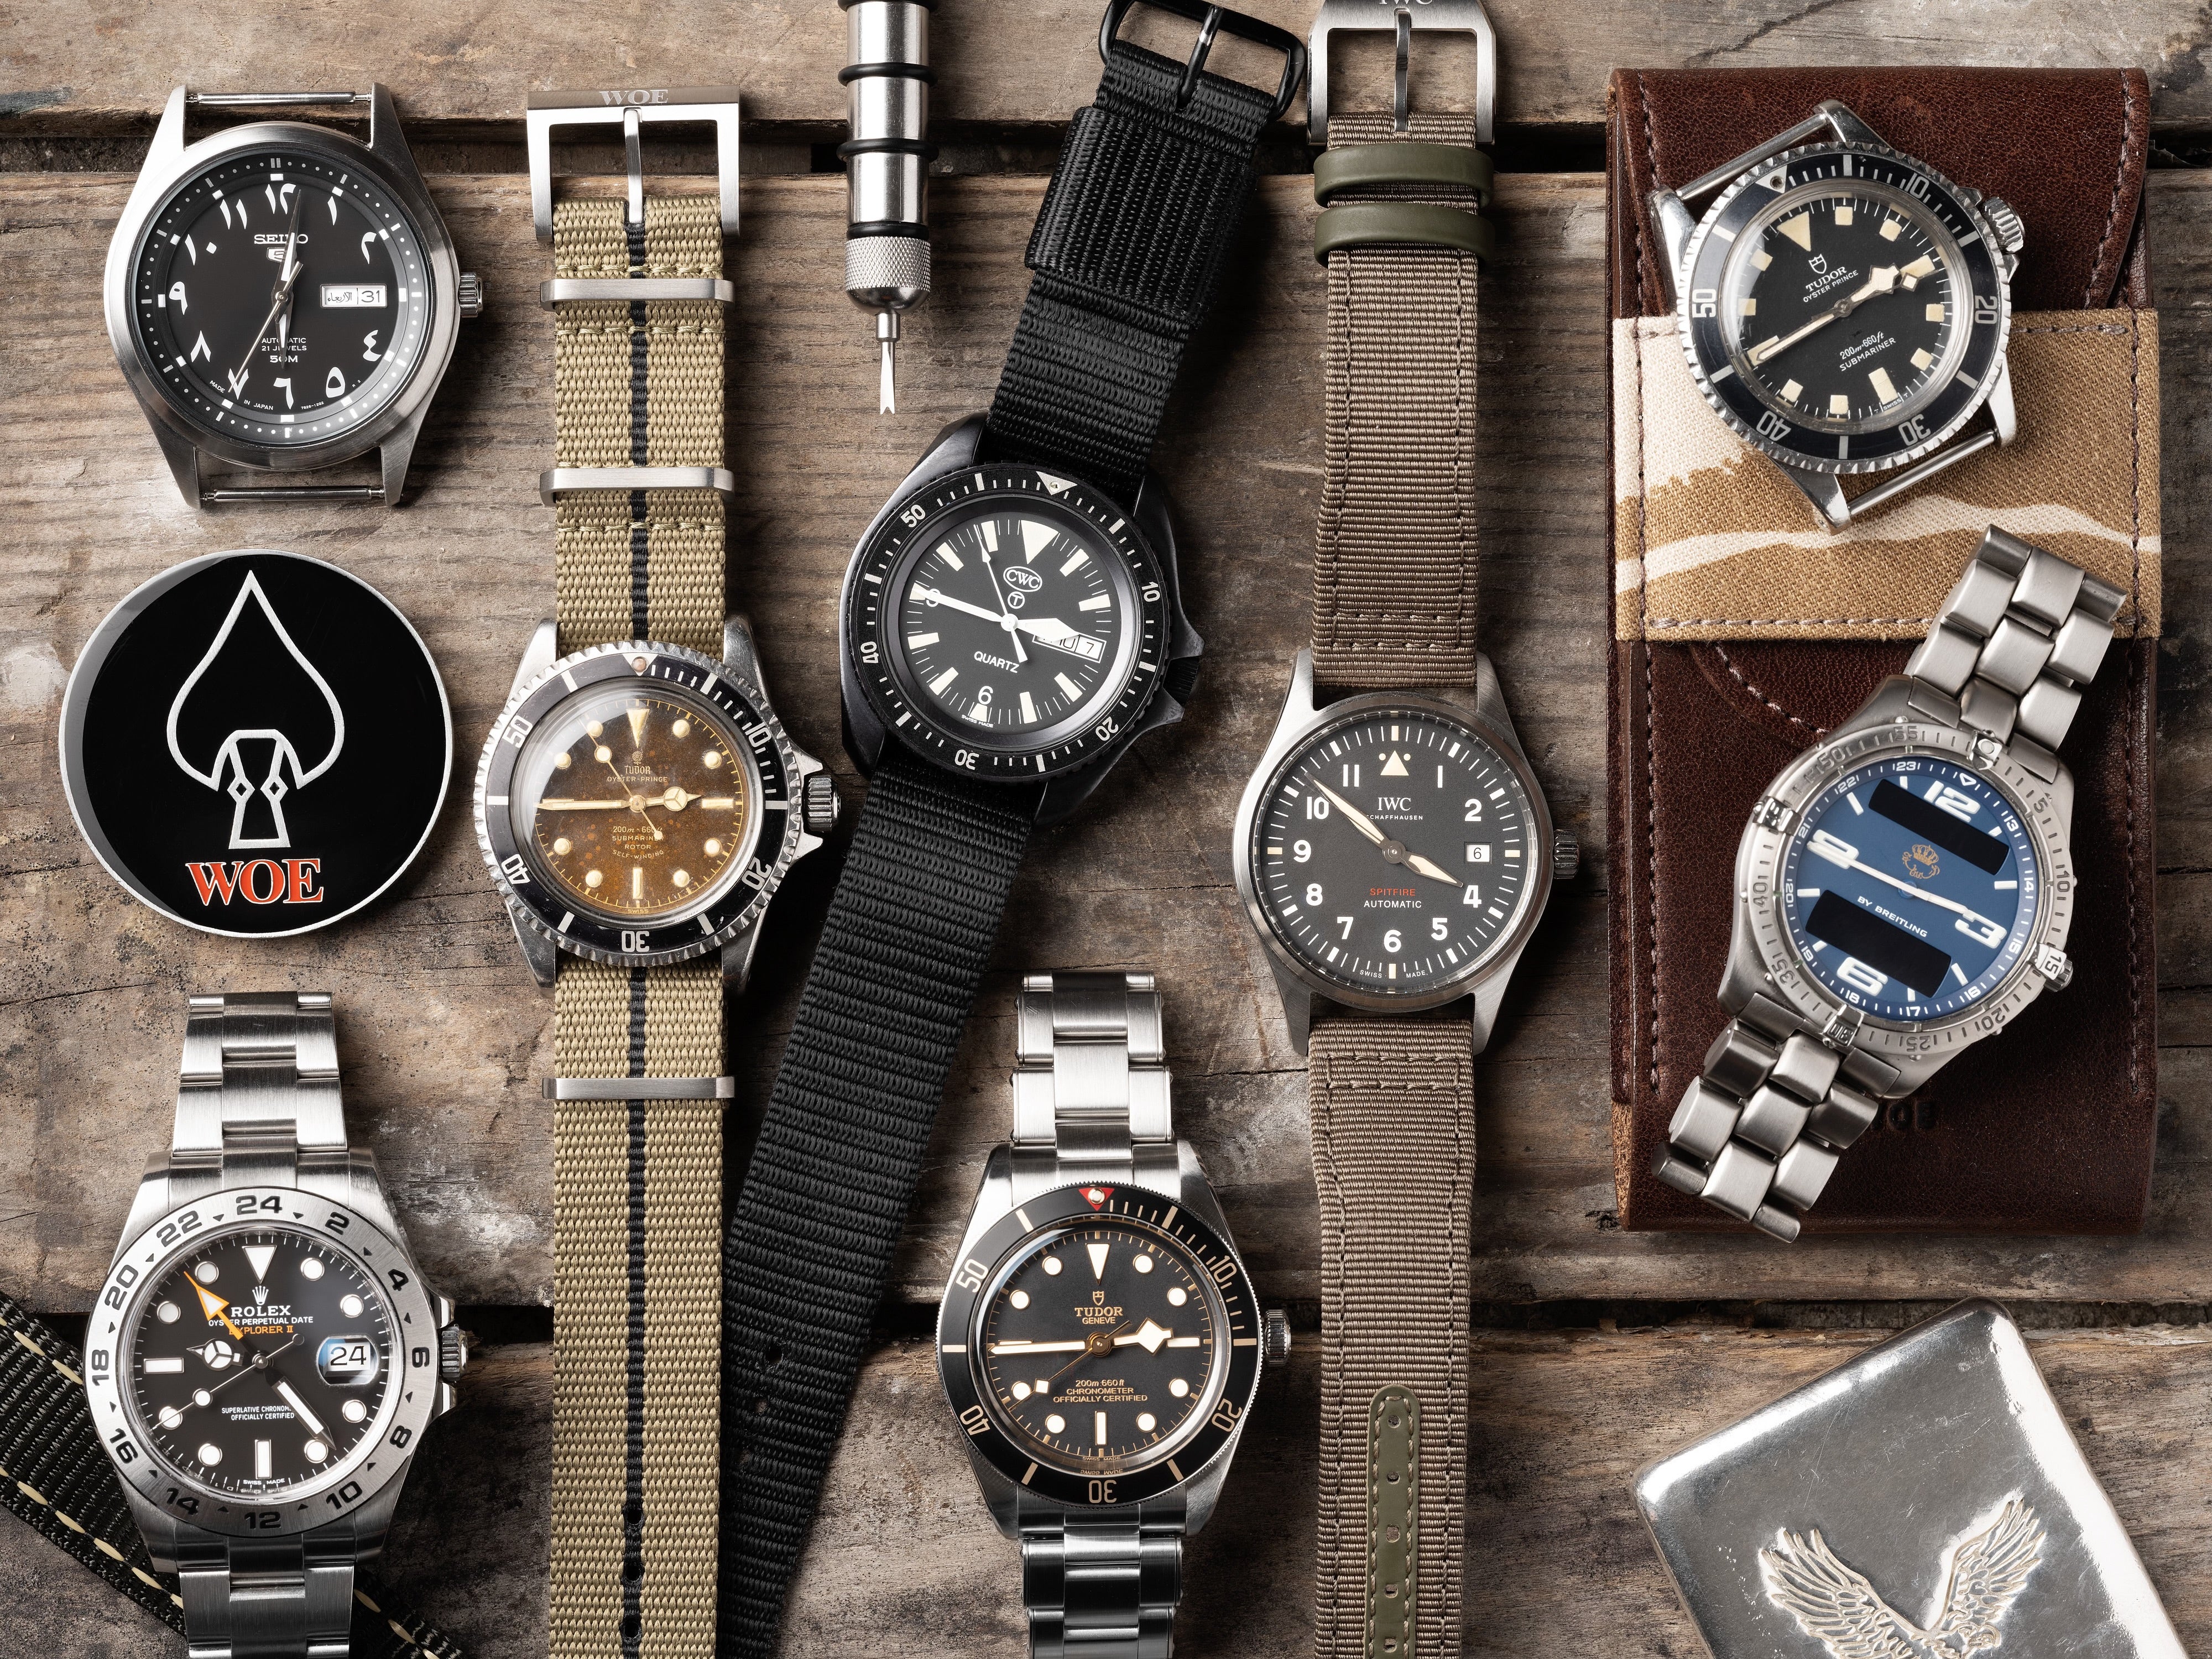 PVD Rolex Creations from the Bamford Watch Department